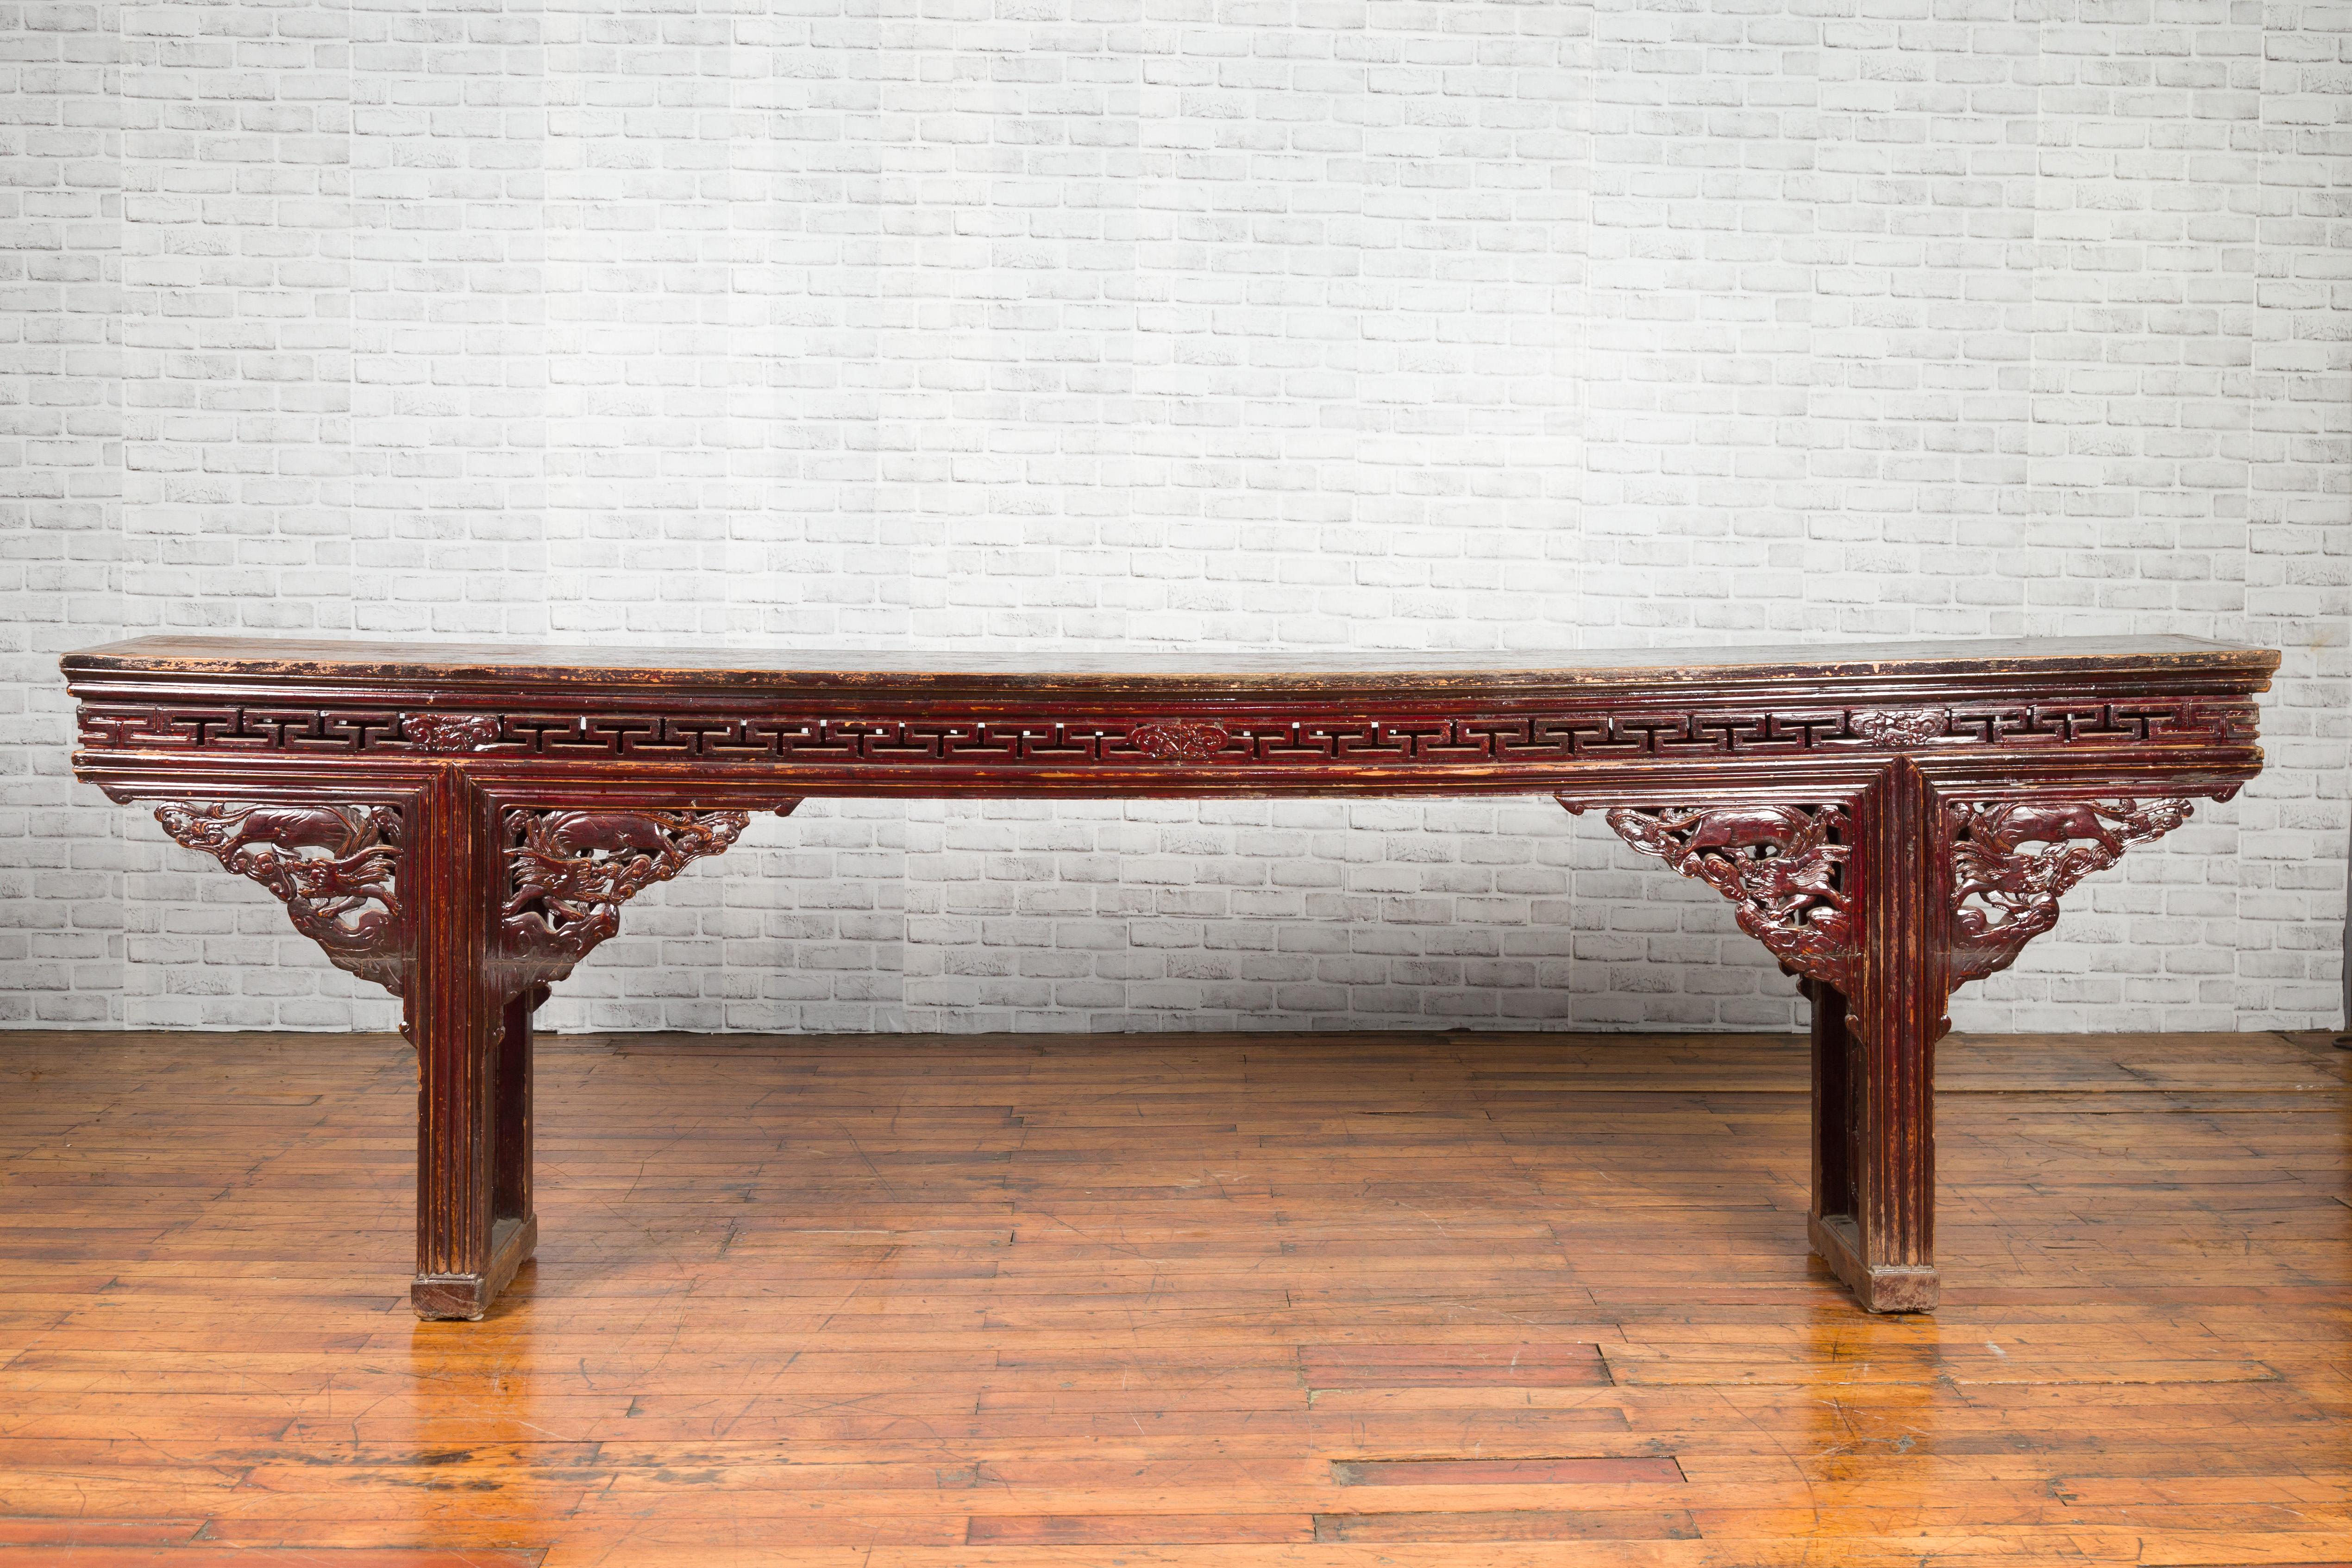 Large Qing Dynasty Chinese Altar Console Table with Fretwork and Dragon Motifs For Sale 6